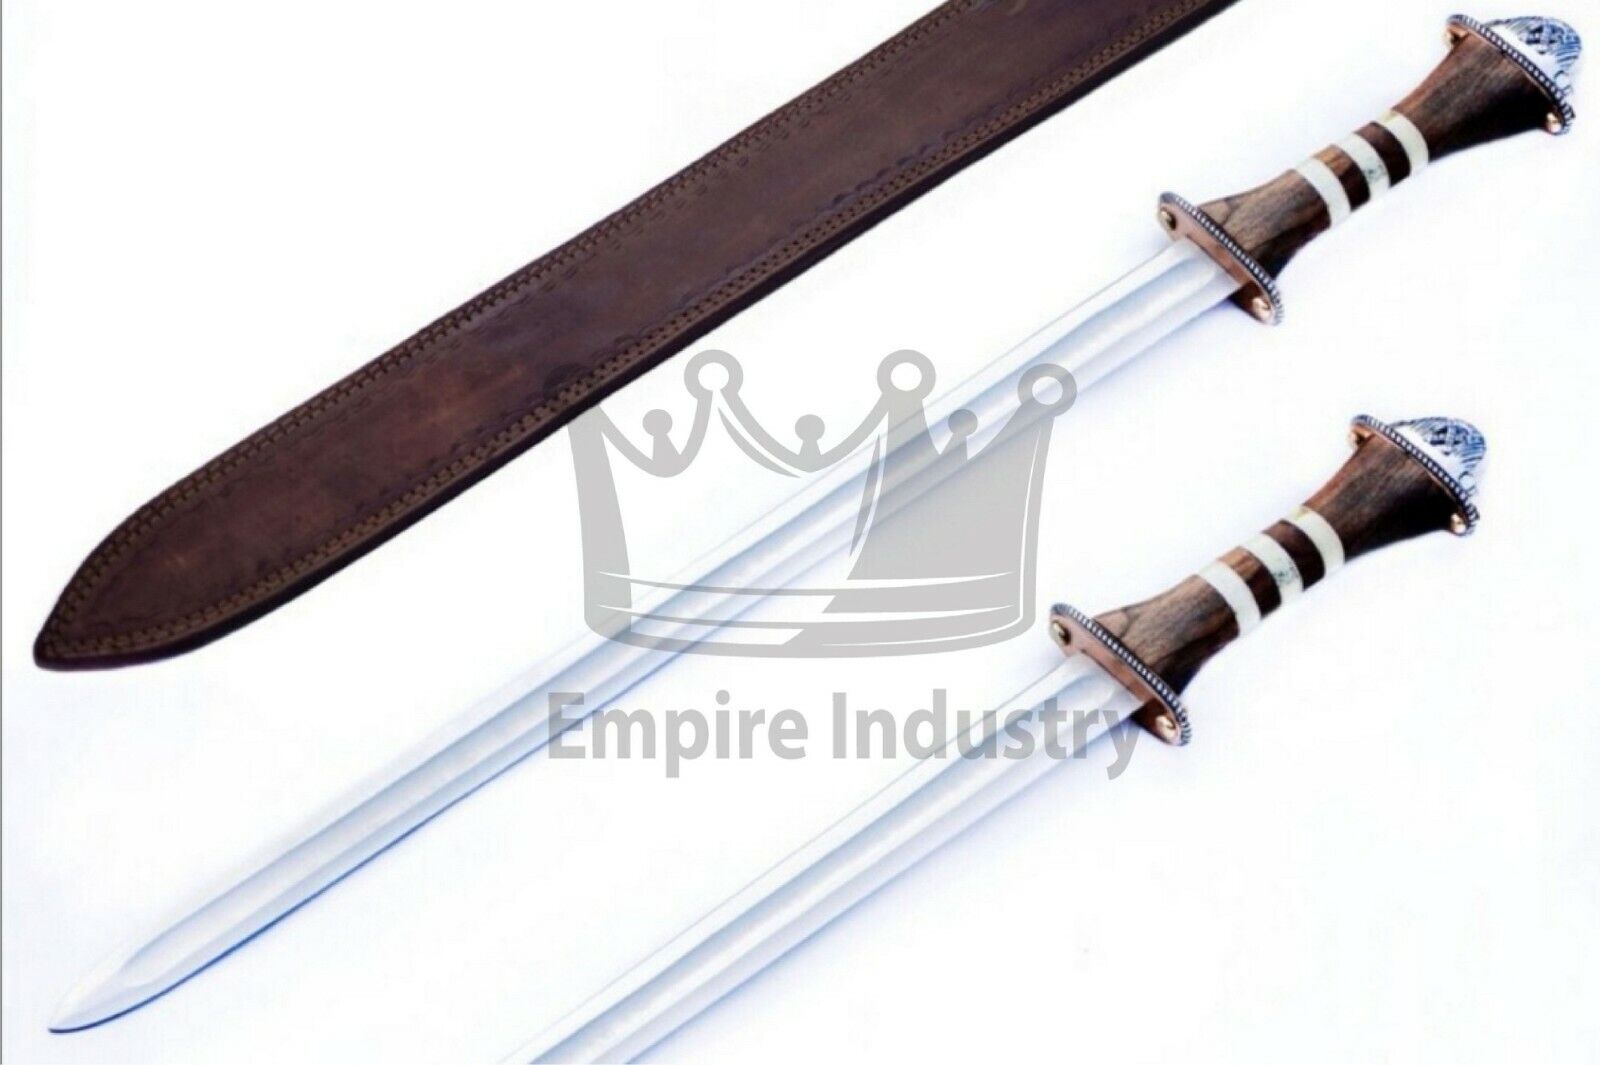 35 Inch Long Double Edge Sword, High Carbon Steel Blade, Blood Groove On Blade